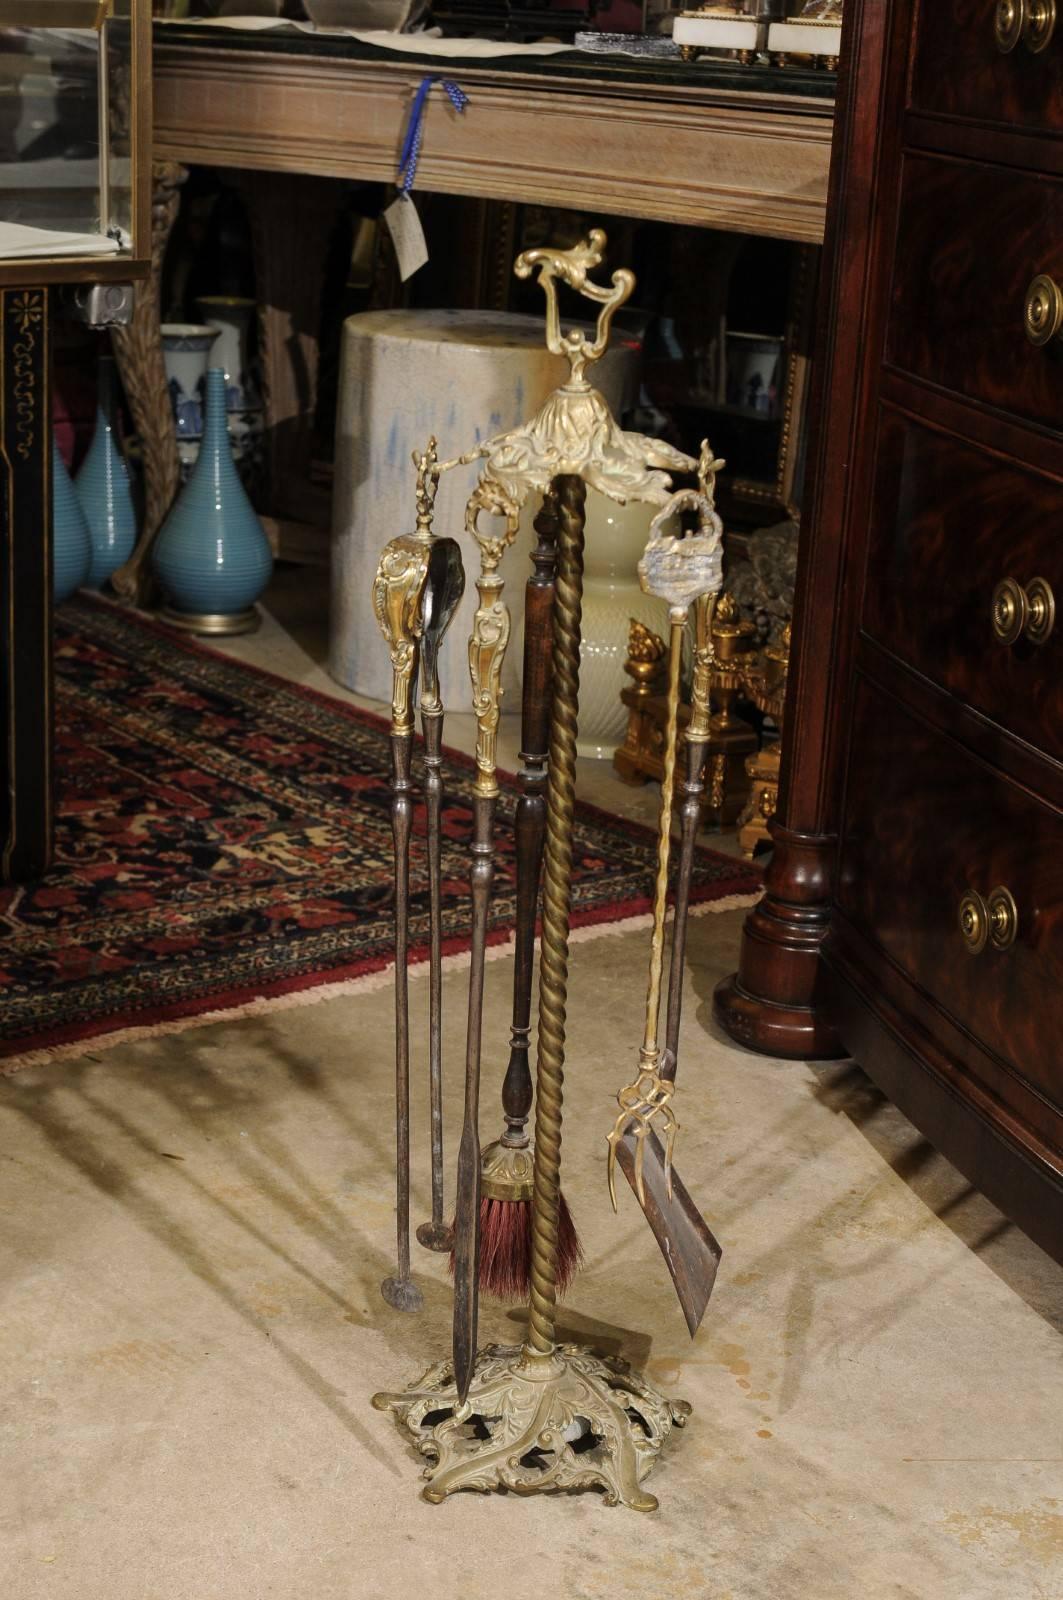 Keep the fire going with the ornate vintage Victorian fireplace tools set.
Included with the base is a fire poker, ash shovel, tongs, brush and a smaller fork poker which has Ann Hathaway's cottage on the top (which may or may not have come with